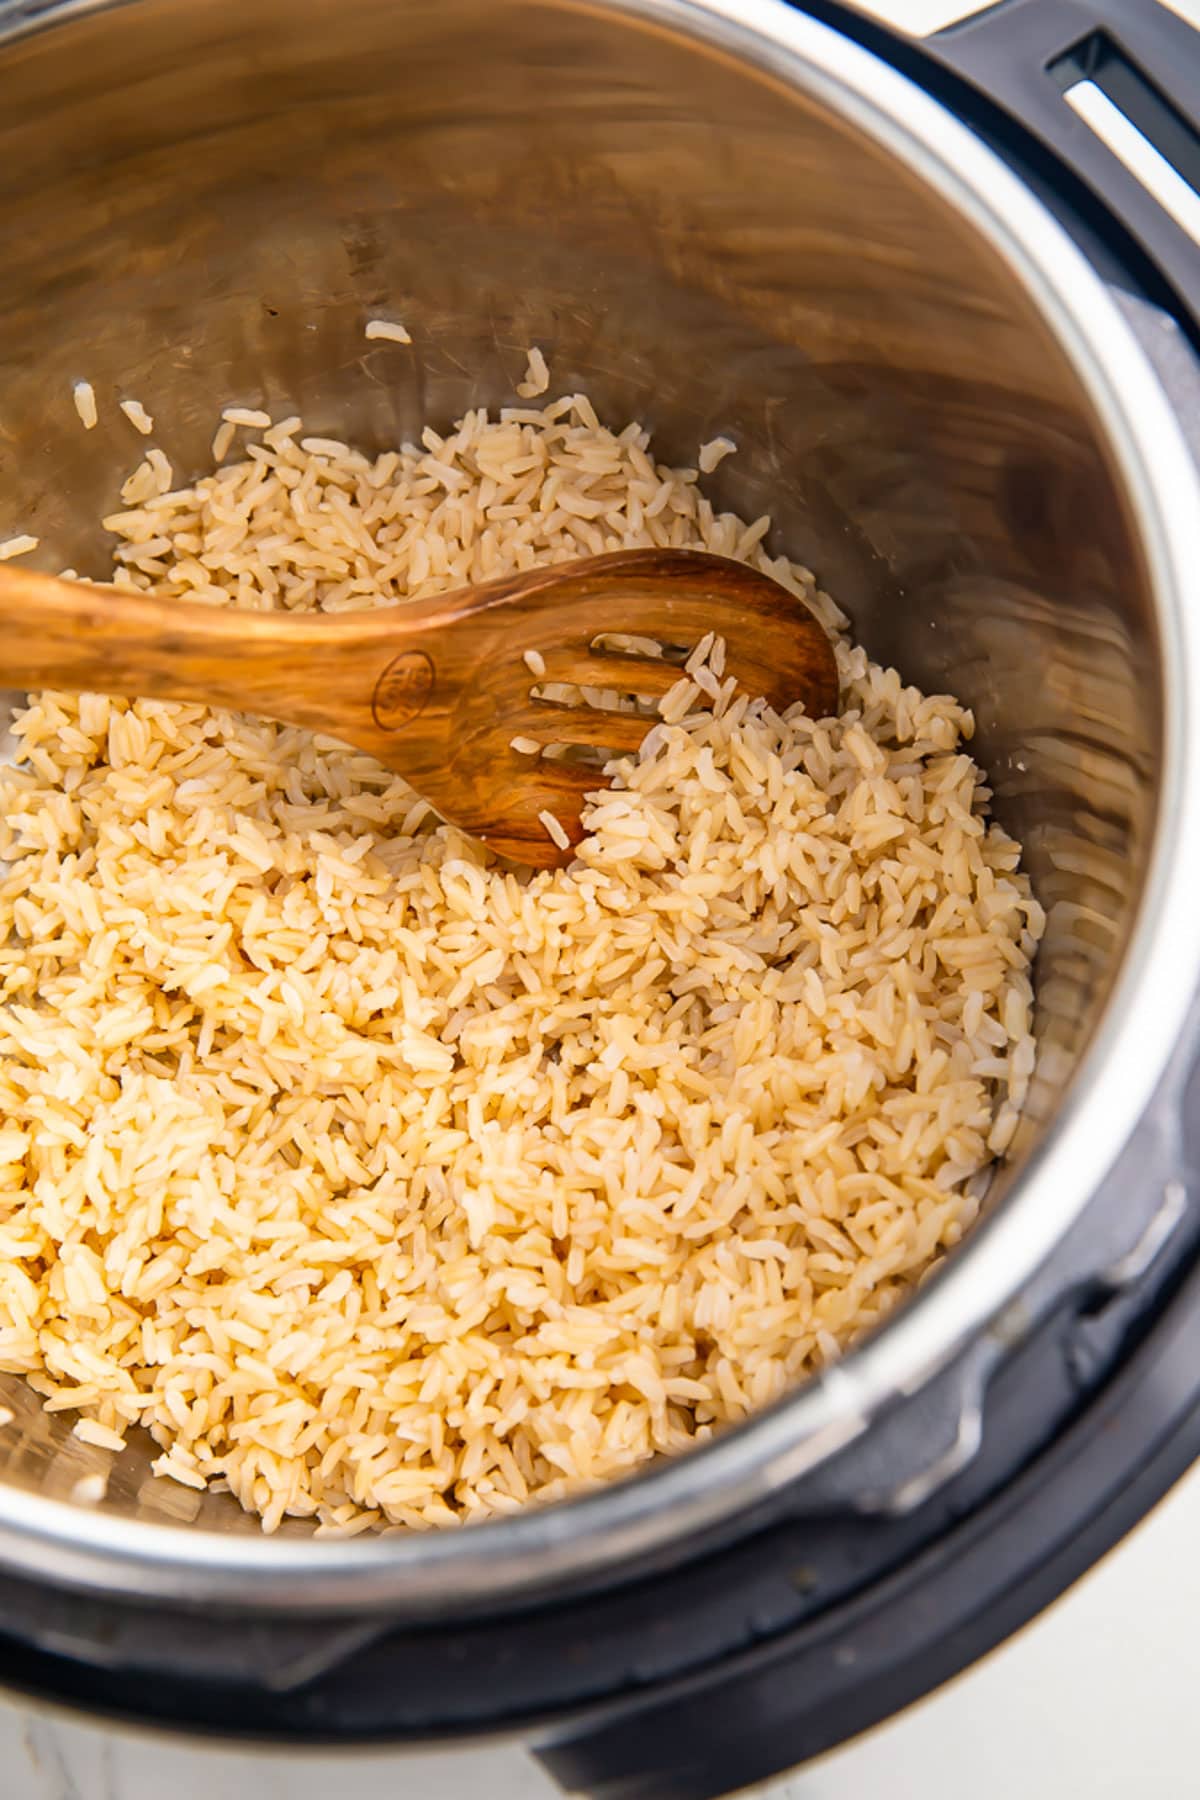 Fully cooked brown rice in an Instant Pot with a brown wooden spoon.